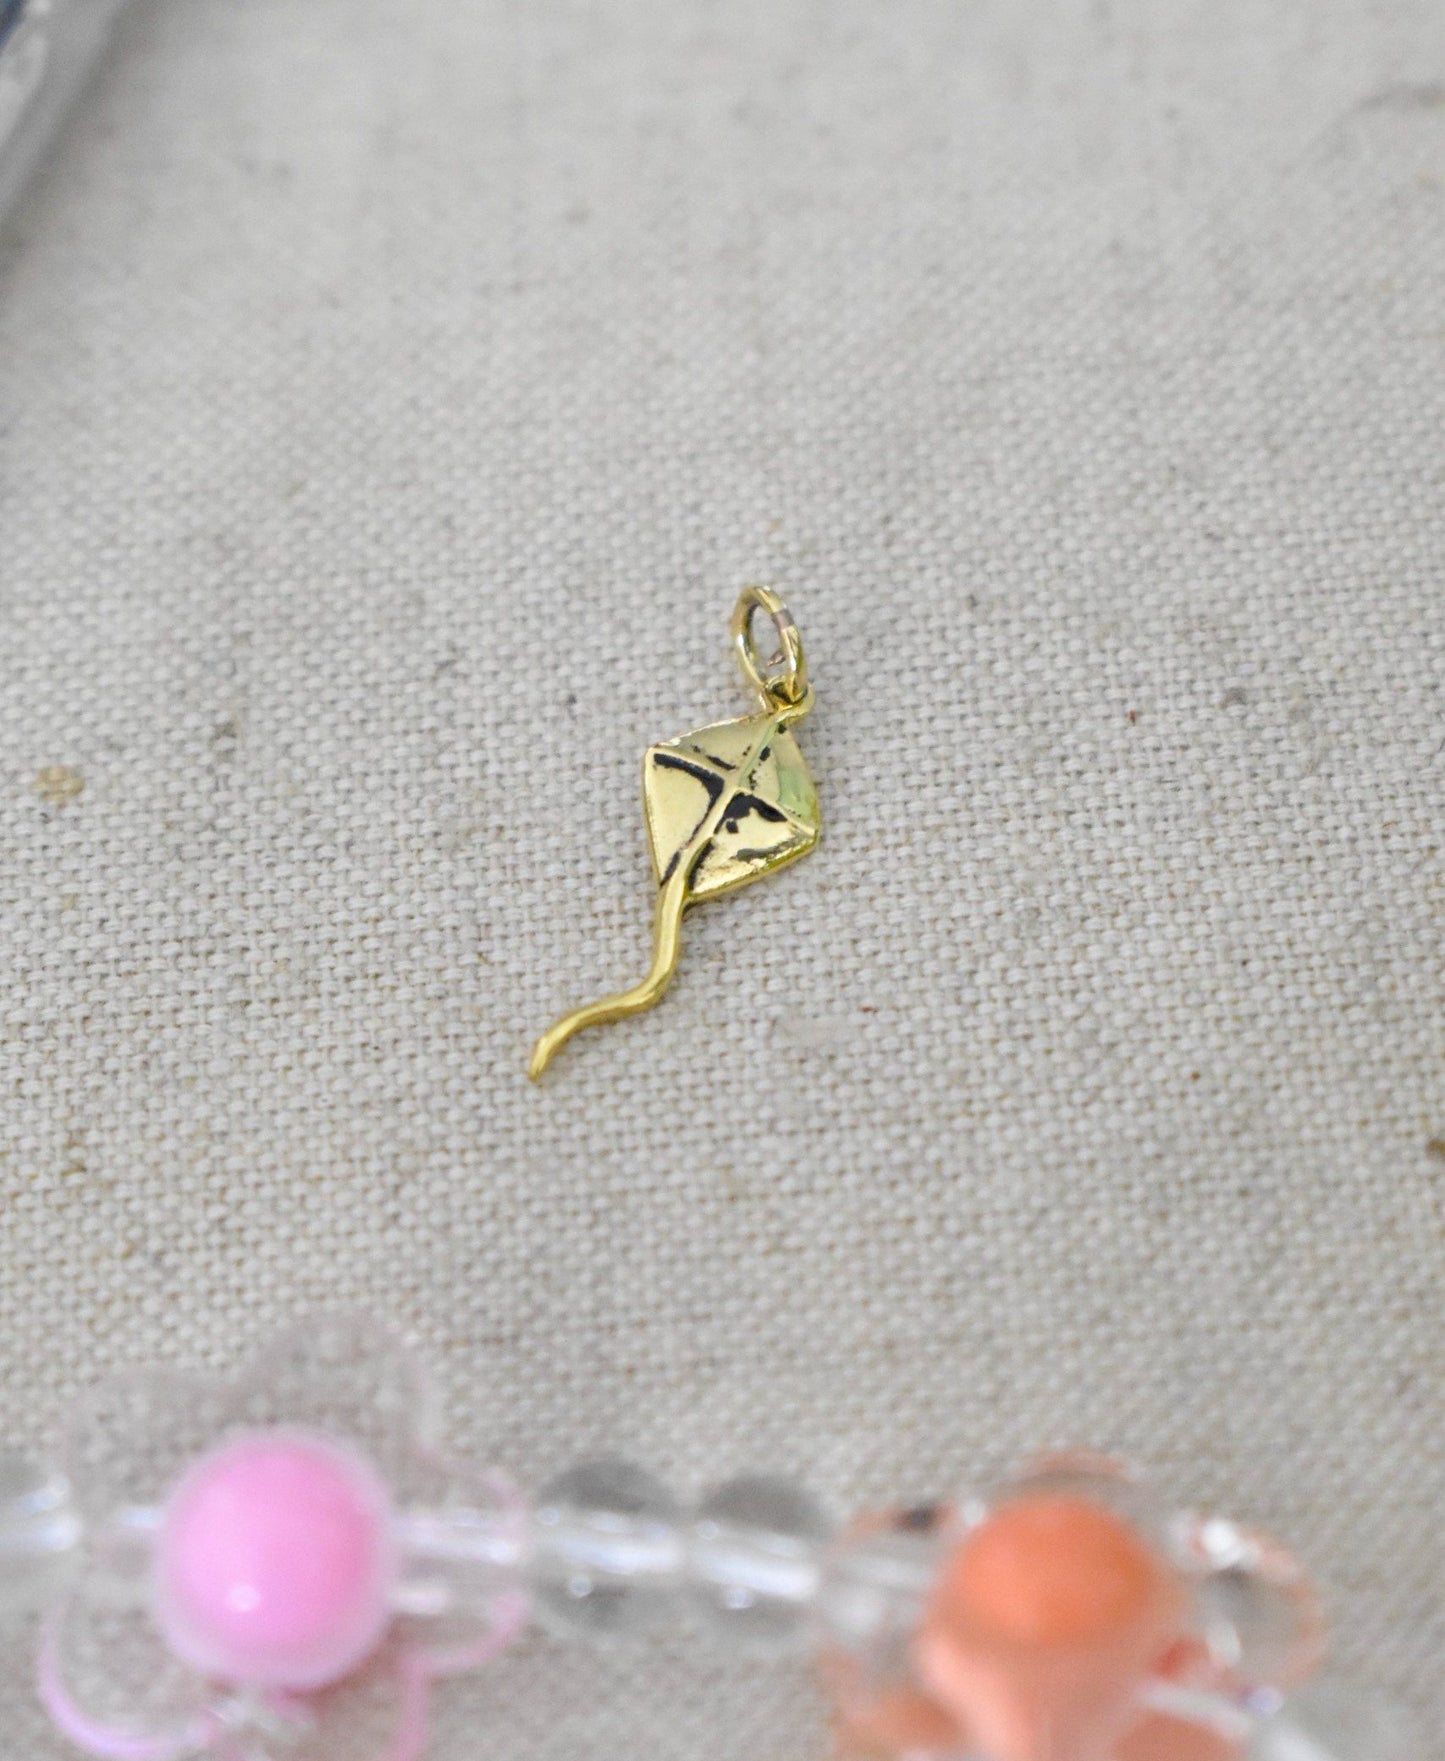 Kite Flyer Brass Charm Necklace Pendant Jewelry With Cotton Cord